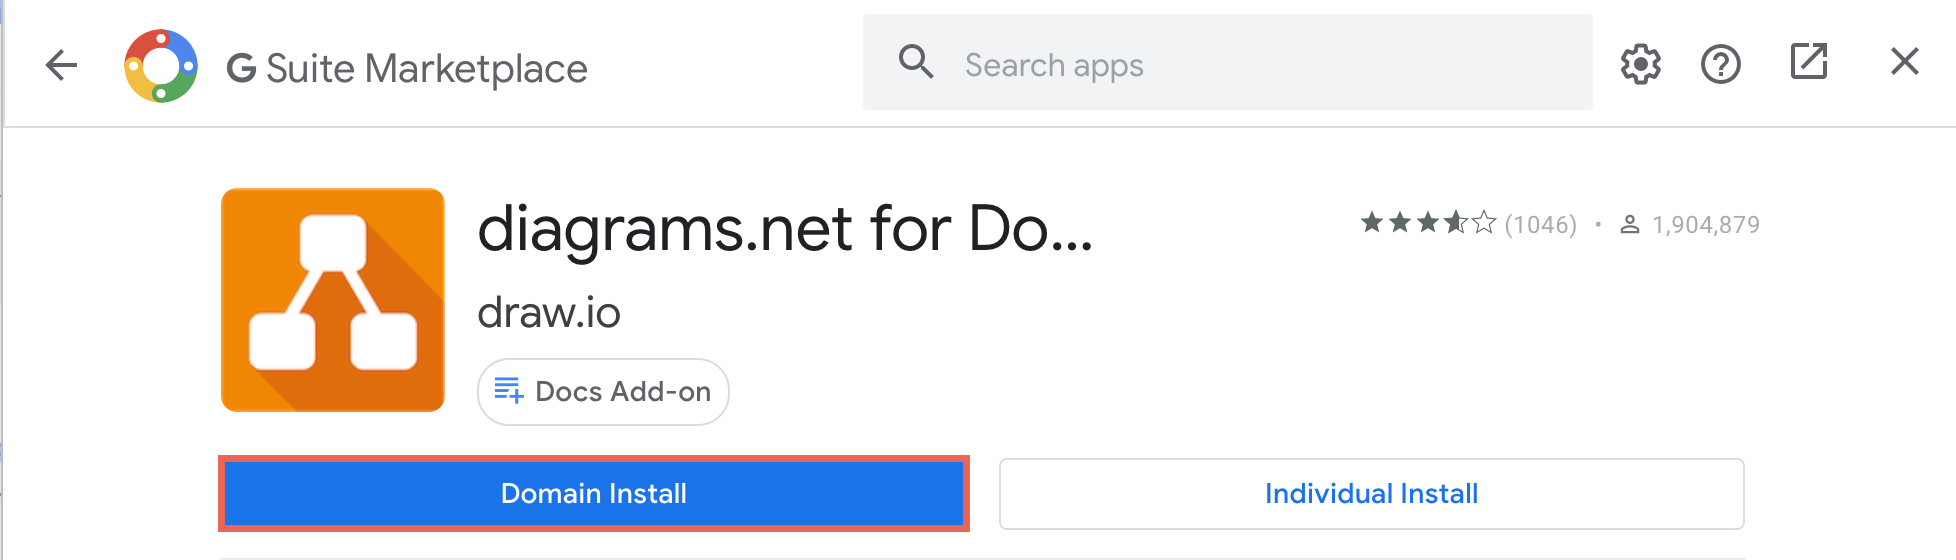 Install the draw.io add-ons for Google Workplace domain wide